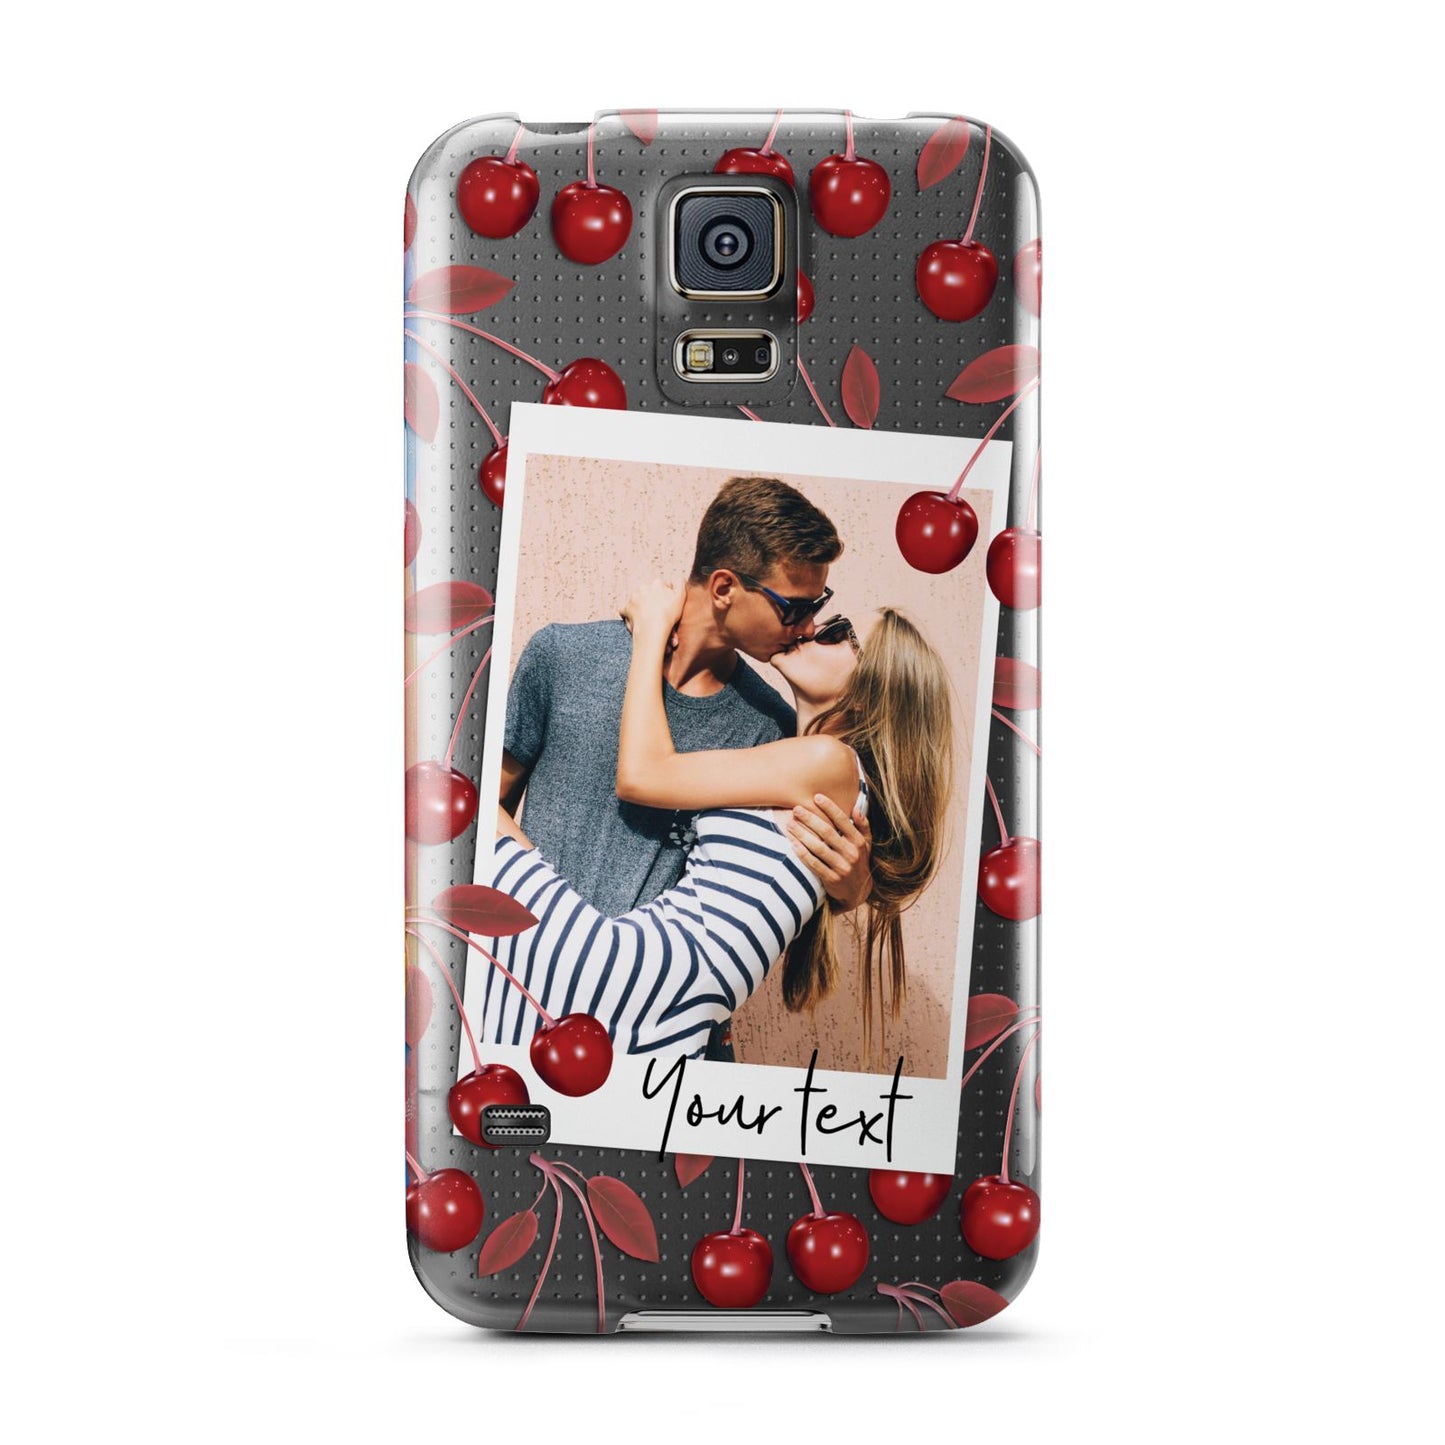 Personalised Photo Cherry Samsung Galaxy S5 Case